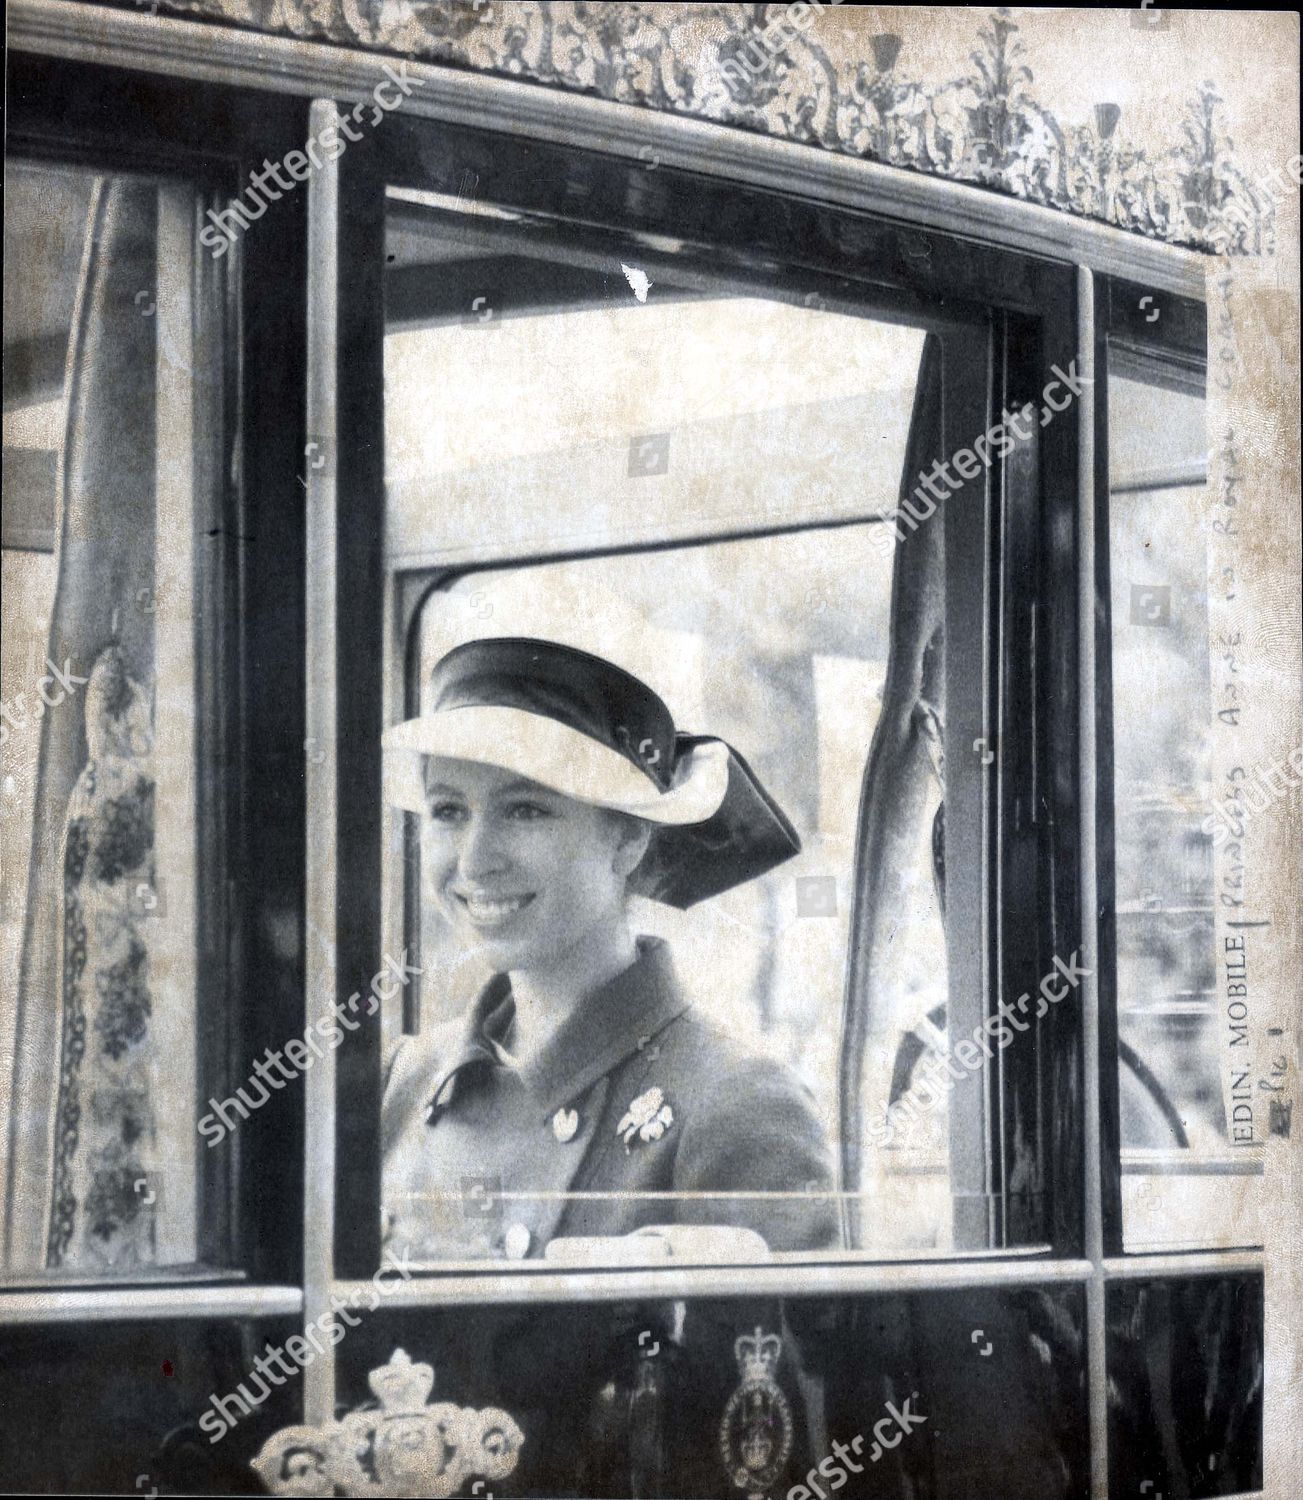 princess-anne-now-princess-royal-1969-picture-shows-princess-anne-in-royal-coach-when-she-accompanied-the-queen-at-the-general-assembly-of-the-church-of-scotland-shutterstock-editorial-890808a.jpg